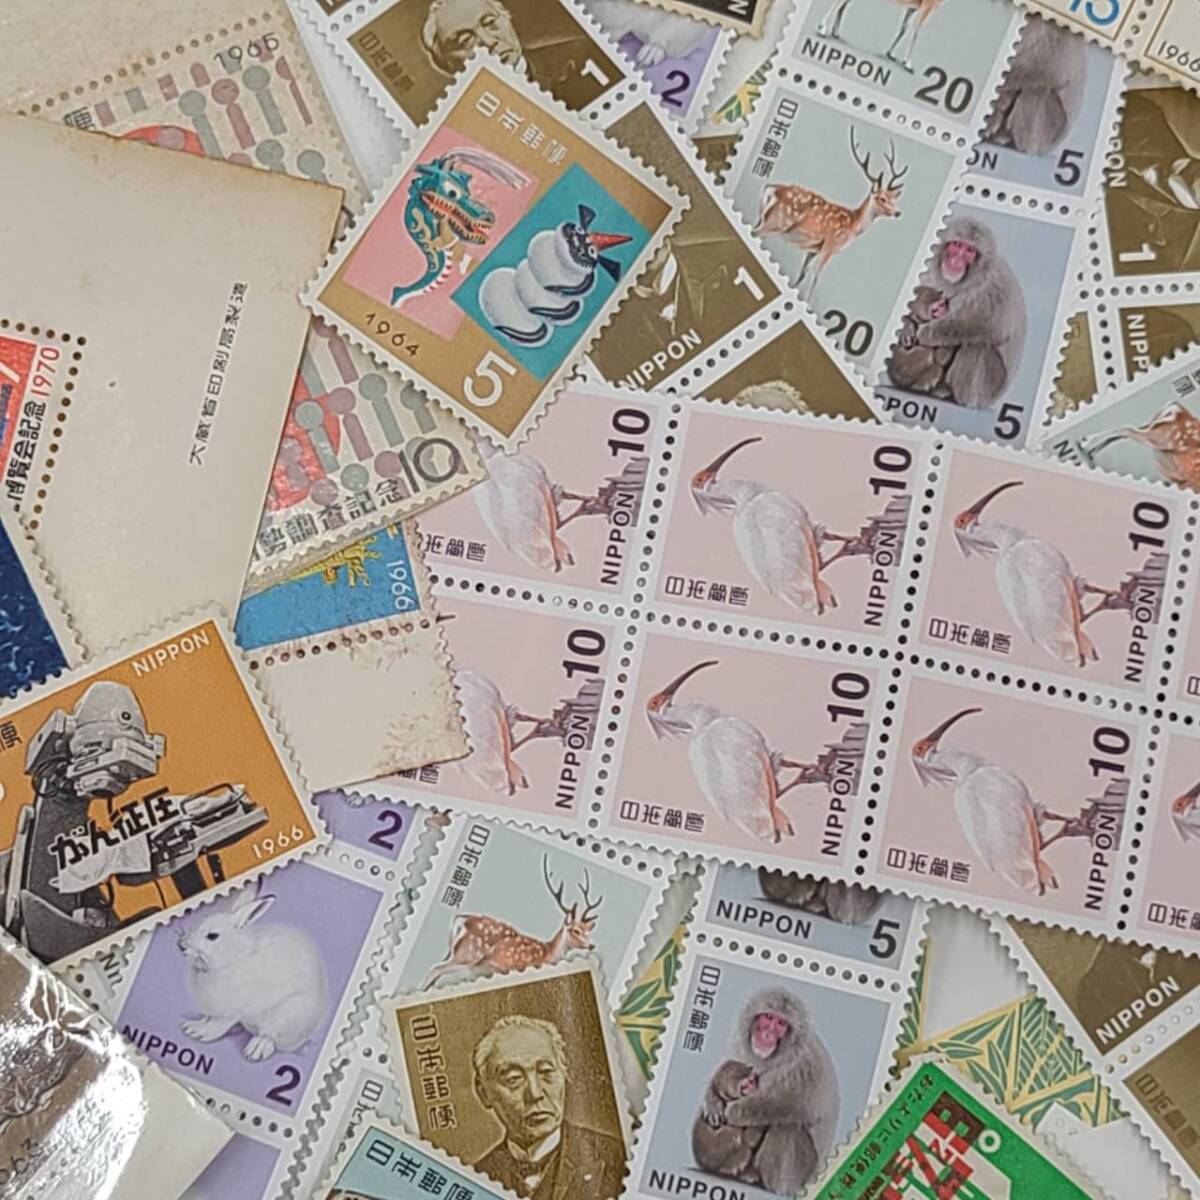 [YYD27.1OM]1 jpy ~ long-term keeping goods low amount rose stamp . summarize face value approximately 3000 jpy minute New Year's gift Japan fine art commemorative stamp Showa Retro collection *retapa shipping 